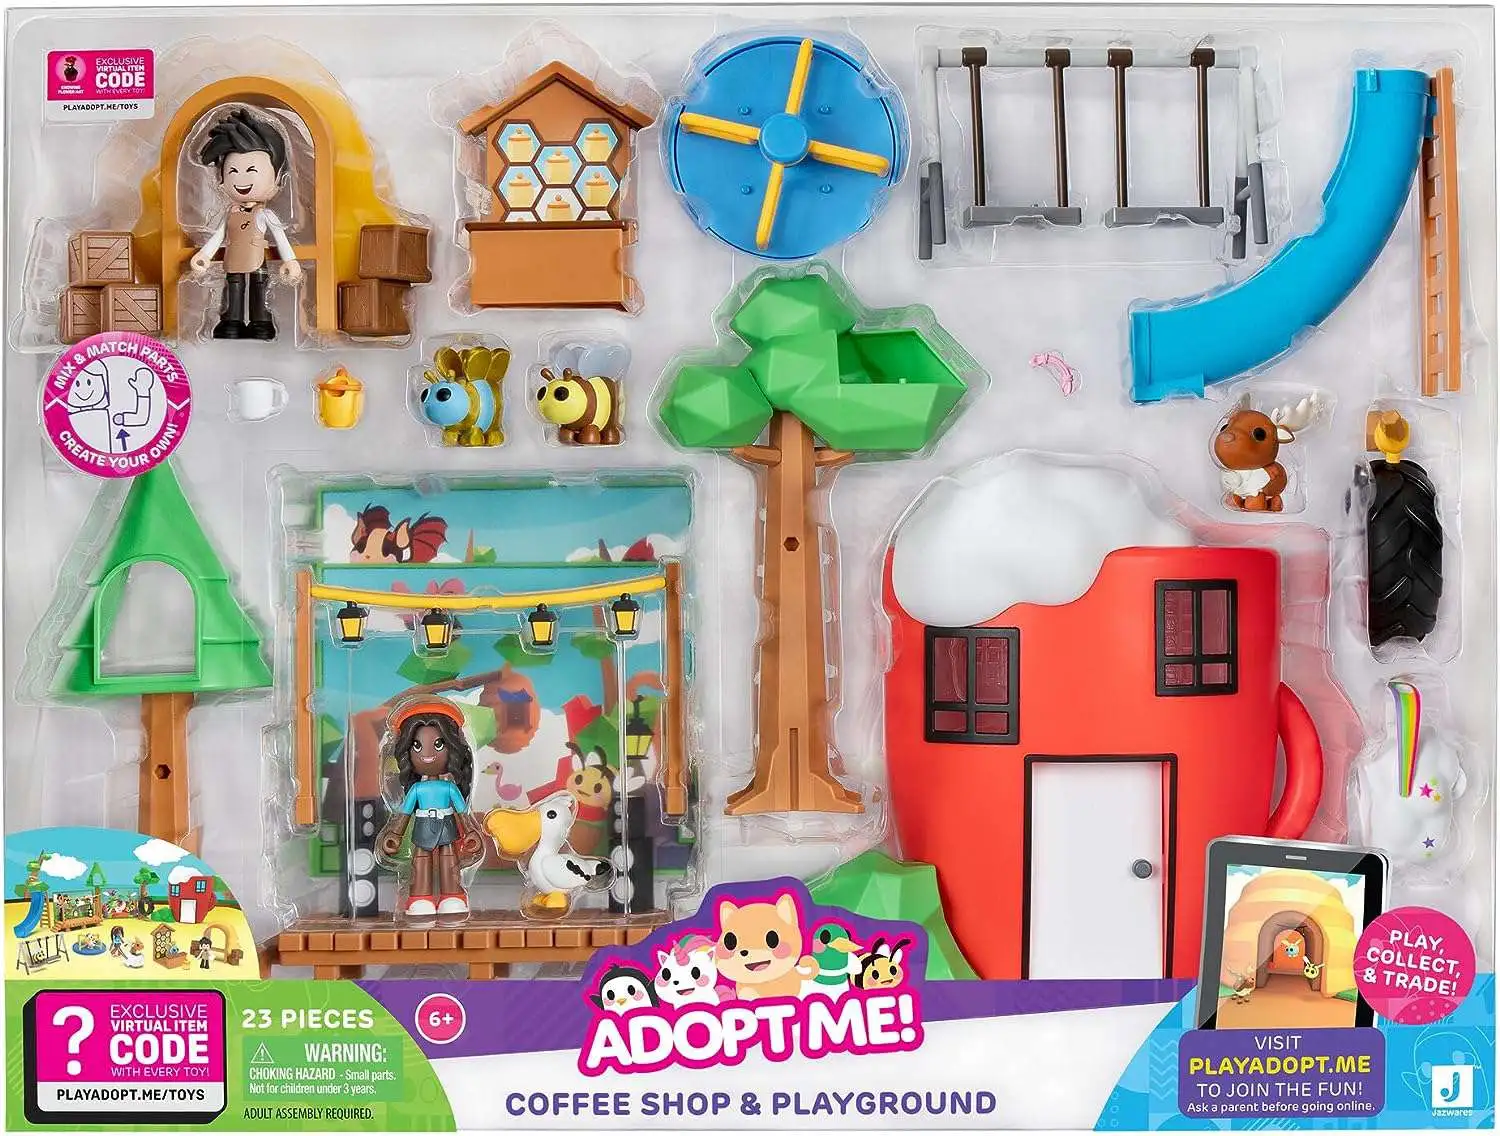 Adopt Me Coffee Shop Playground Playset Comes with Online Virtual Item ...